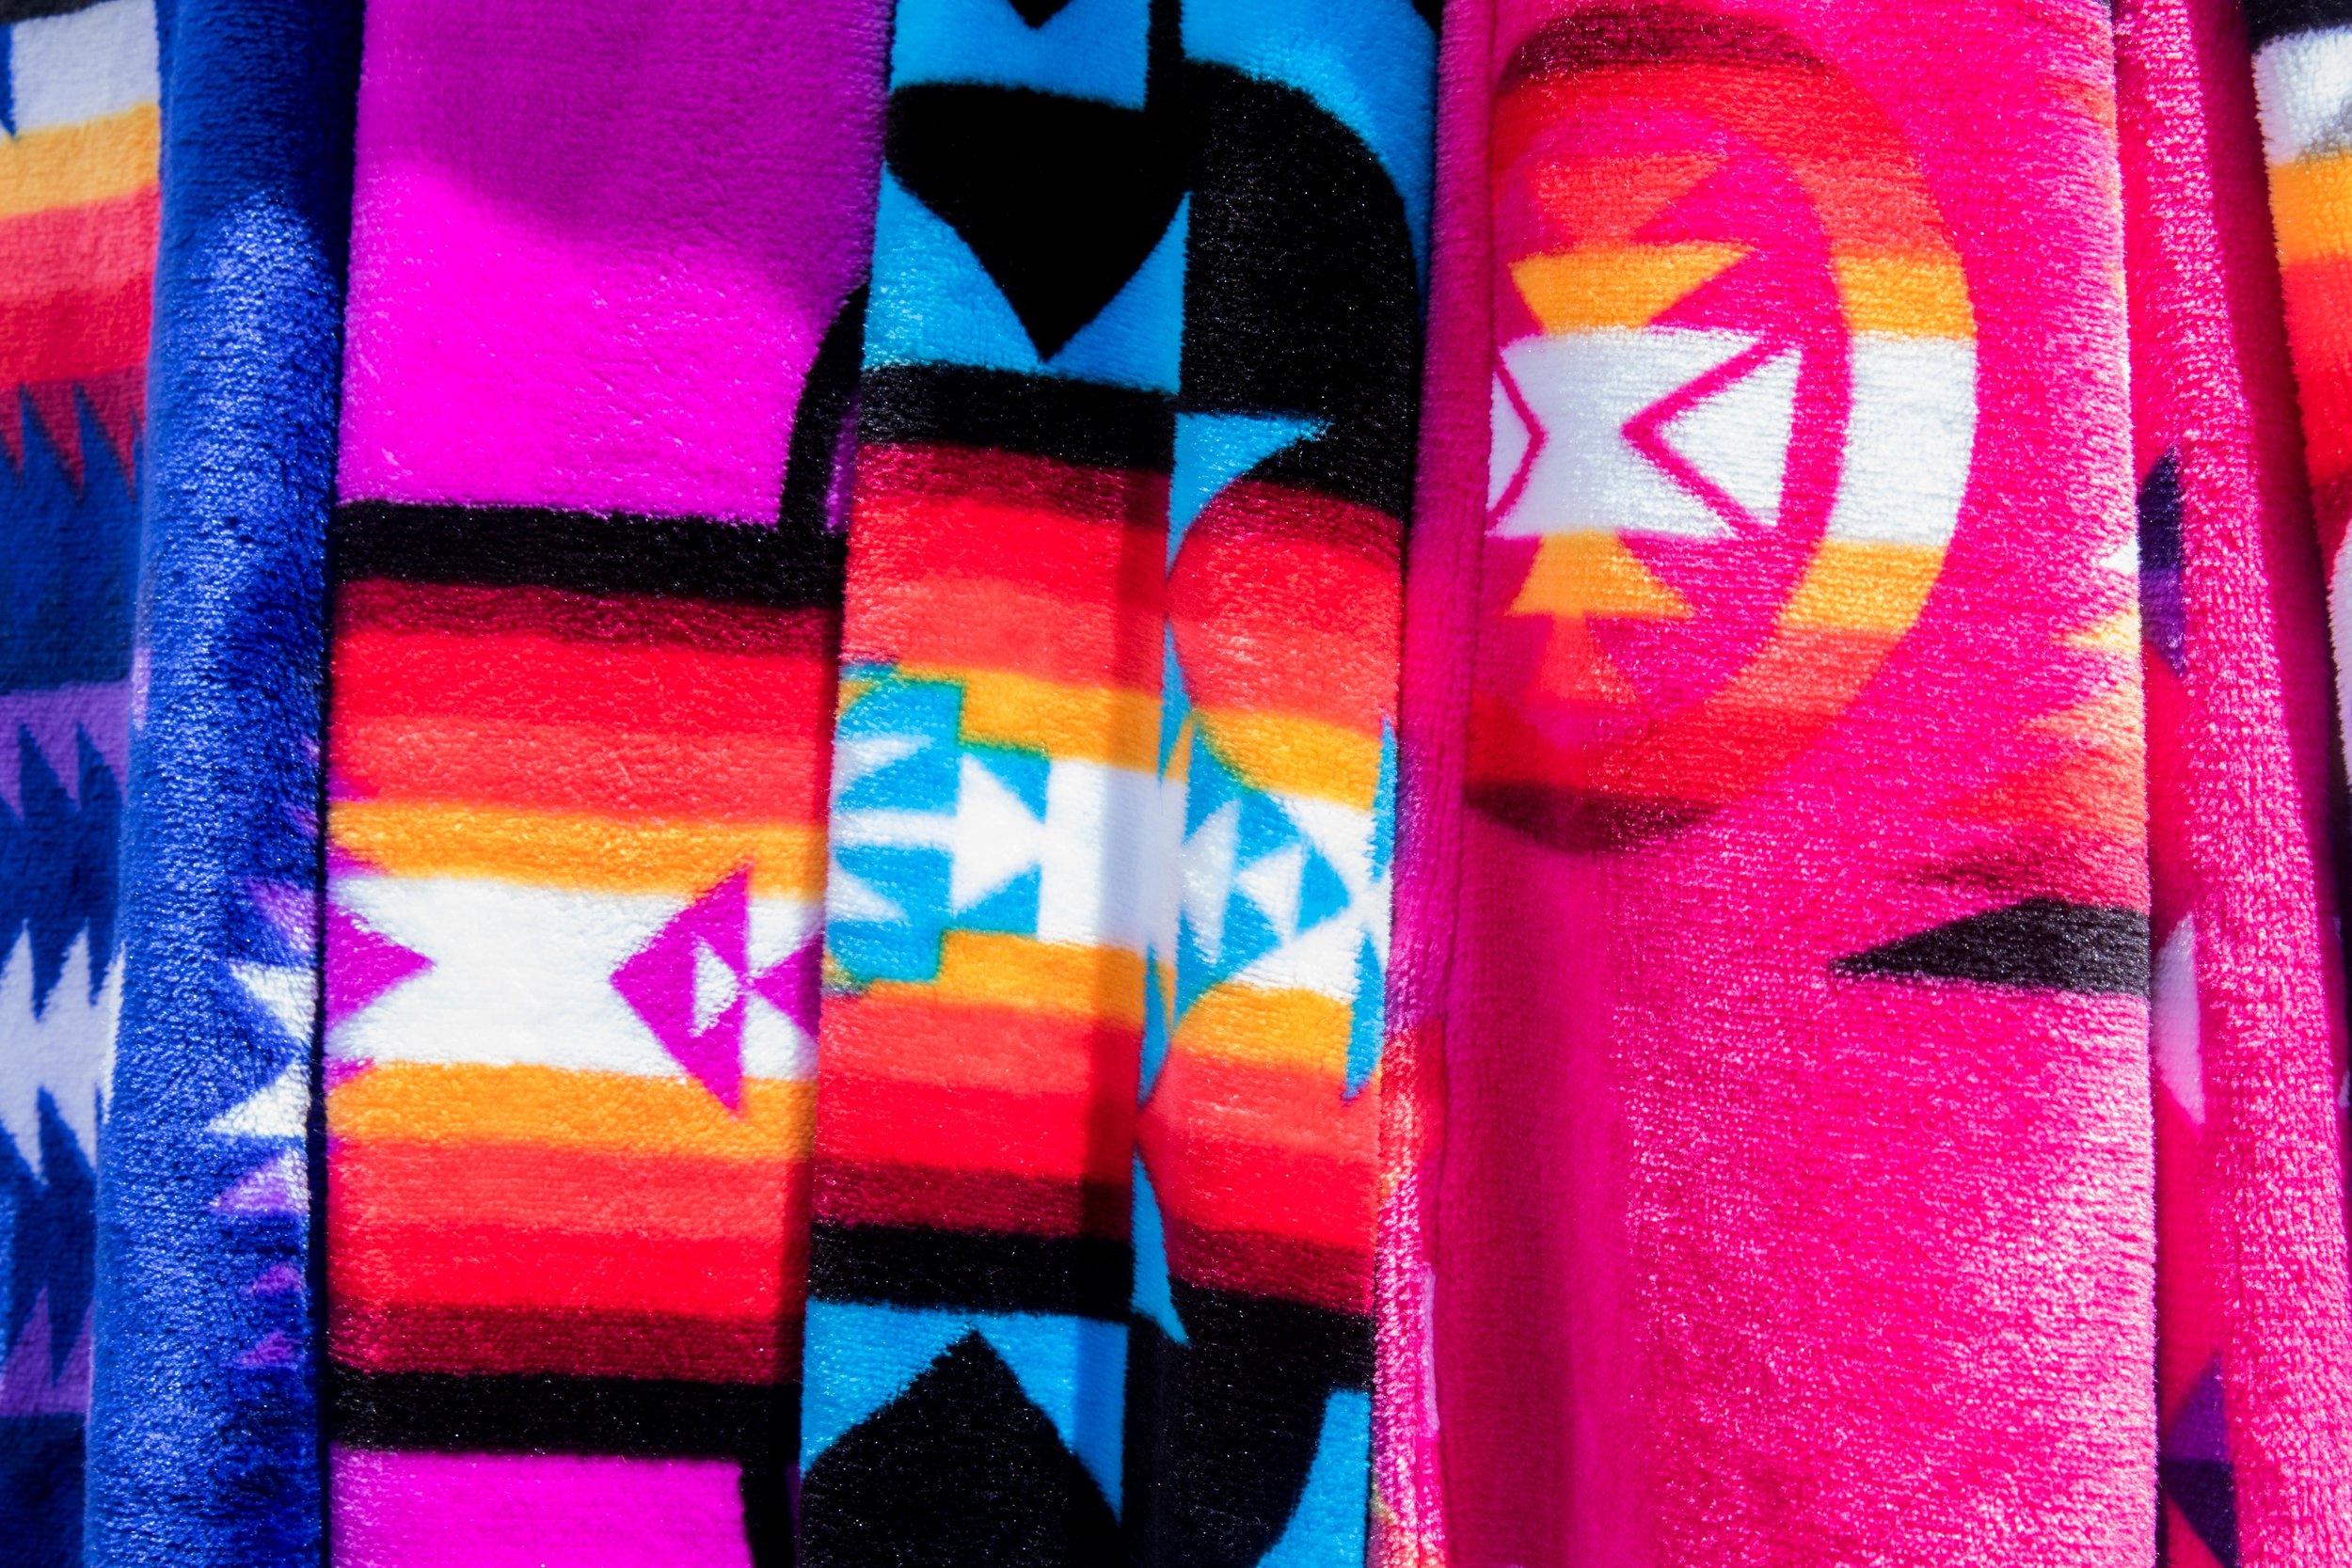  Handmade, Indigenous scarves were one of the many items available for sale at the thirty third annual UCLA Pow-Wow. The Pow-Wow hosted Indigenous Peoples from all over North America and gave event attendees the chance to experience the culture of th